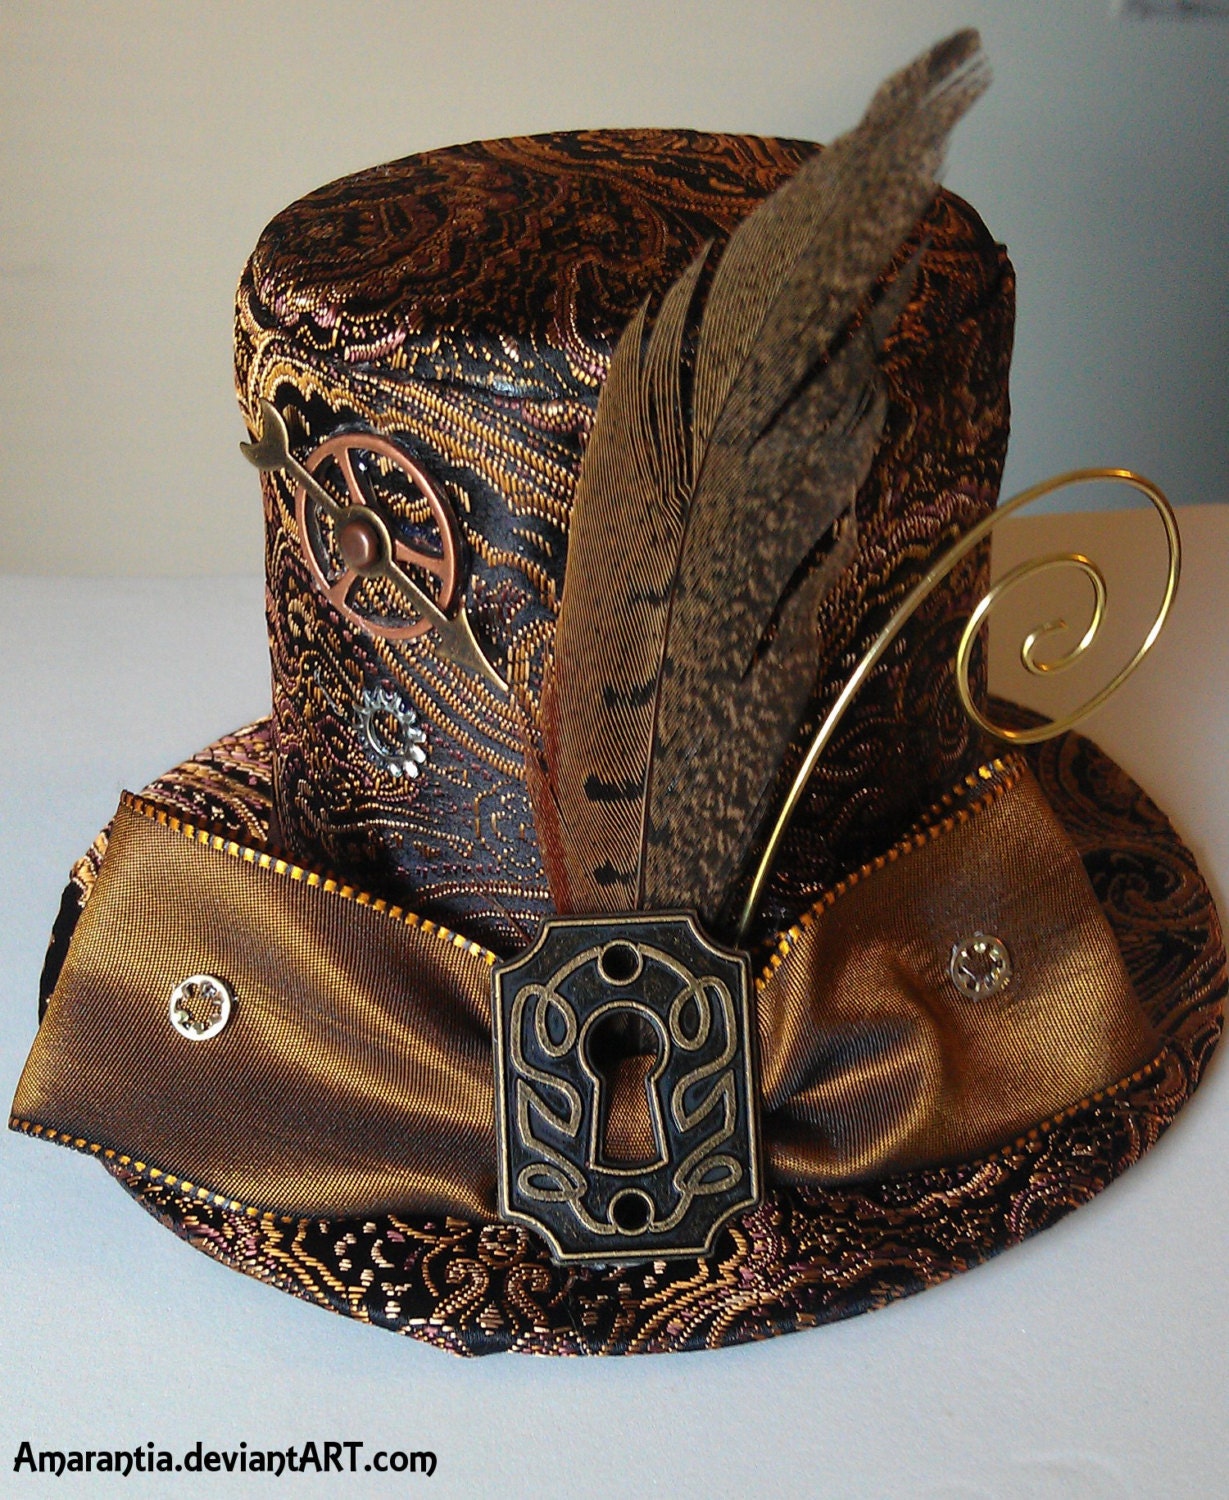 Steampunk For Kids: Steampunk Top Hats For Kids